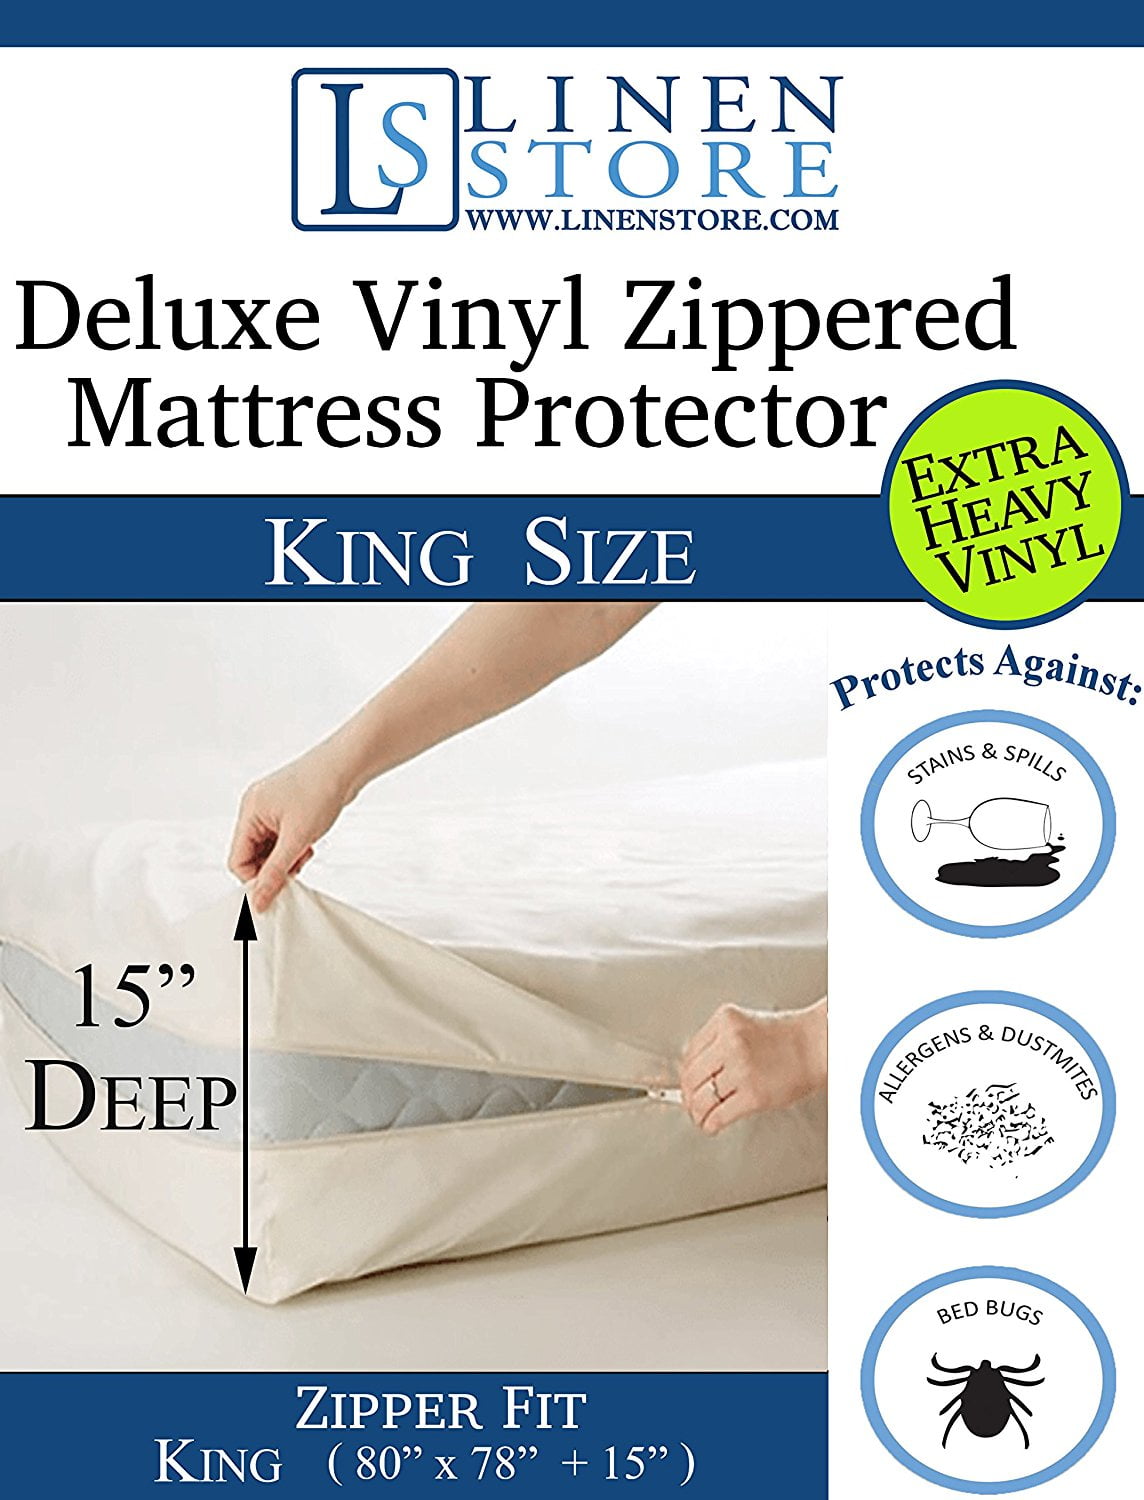 NEW KING SIZE FITTED PVC VINYL WATERPROOF MATTRESS PROTECTOR COVER ALL SIZES 